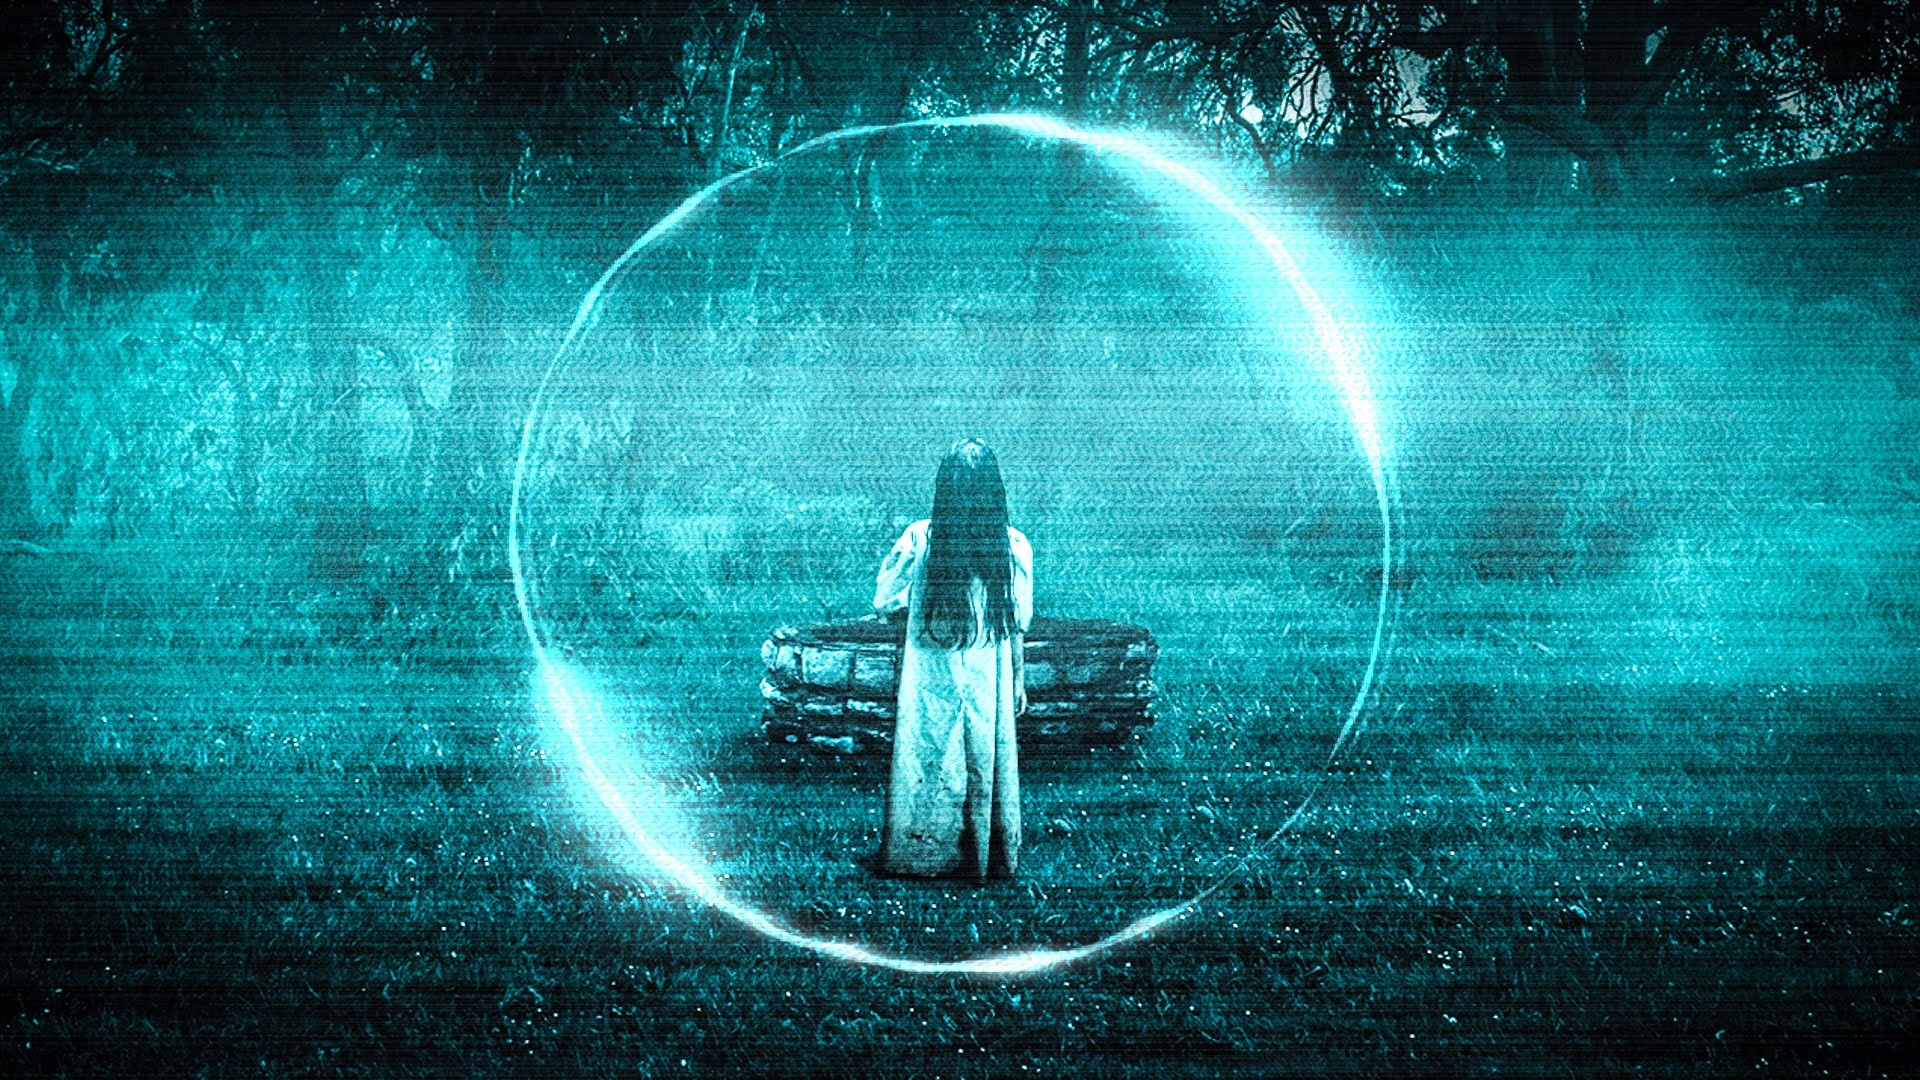 1. 'The Ring' (2002)